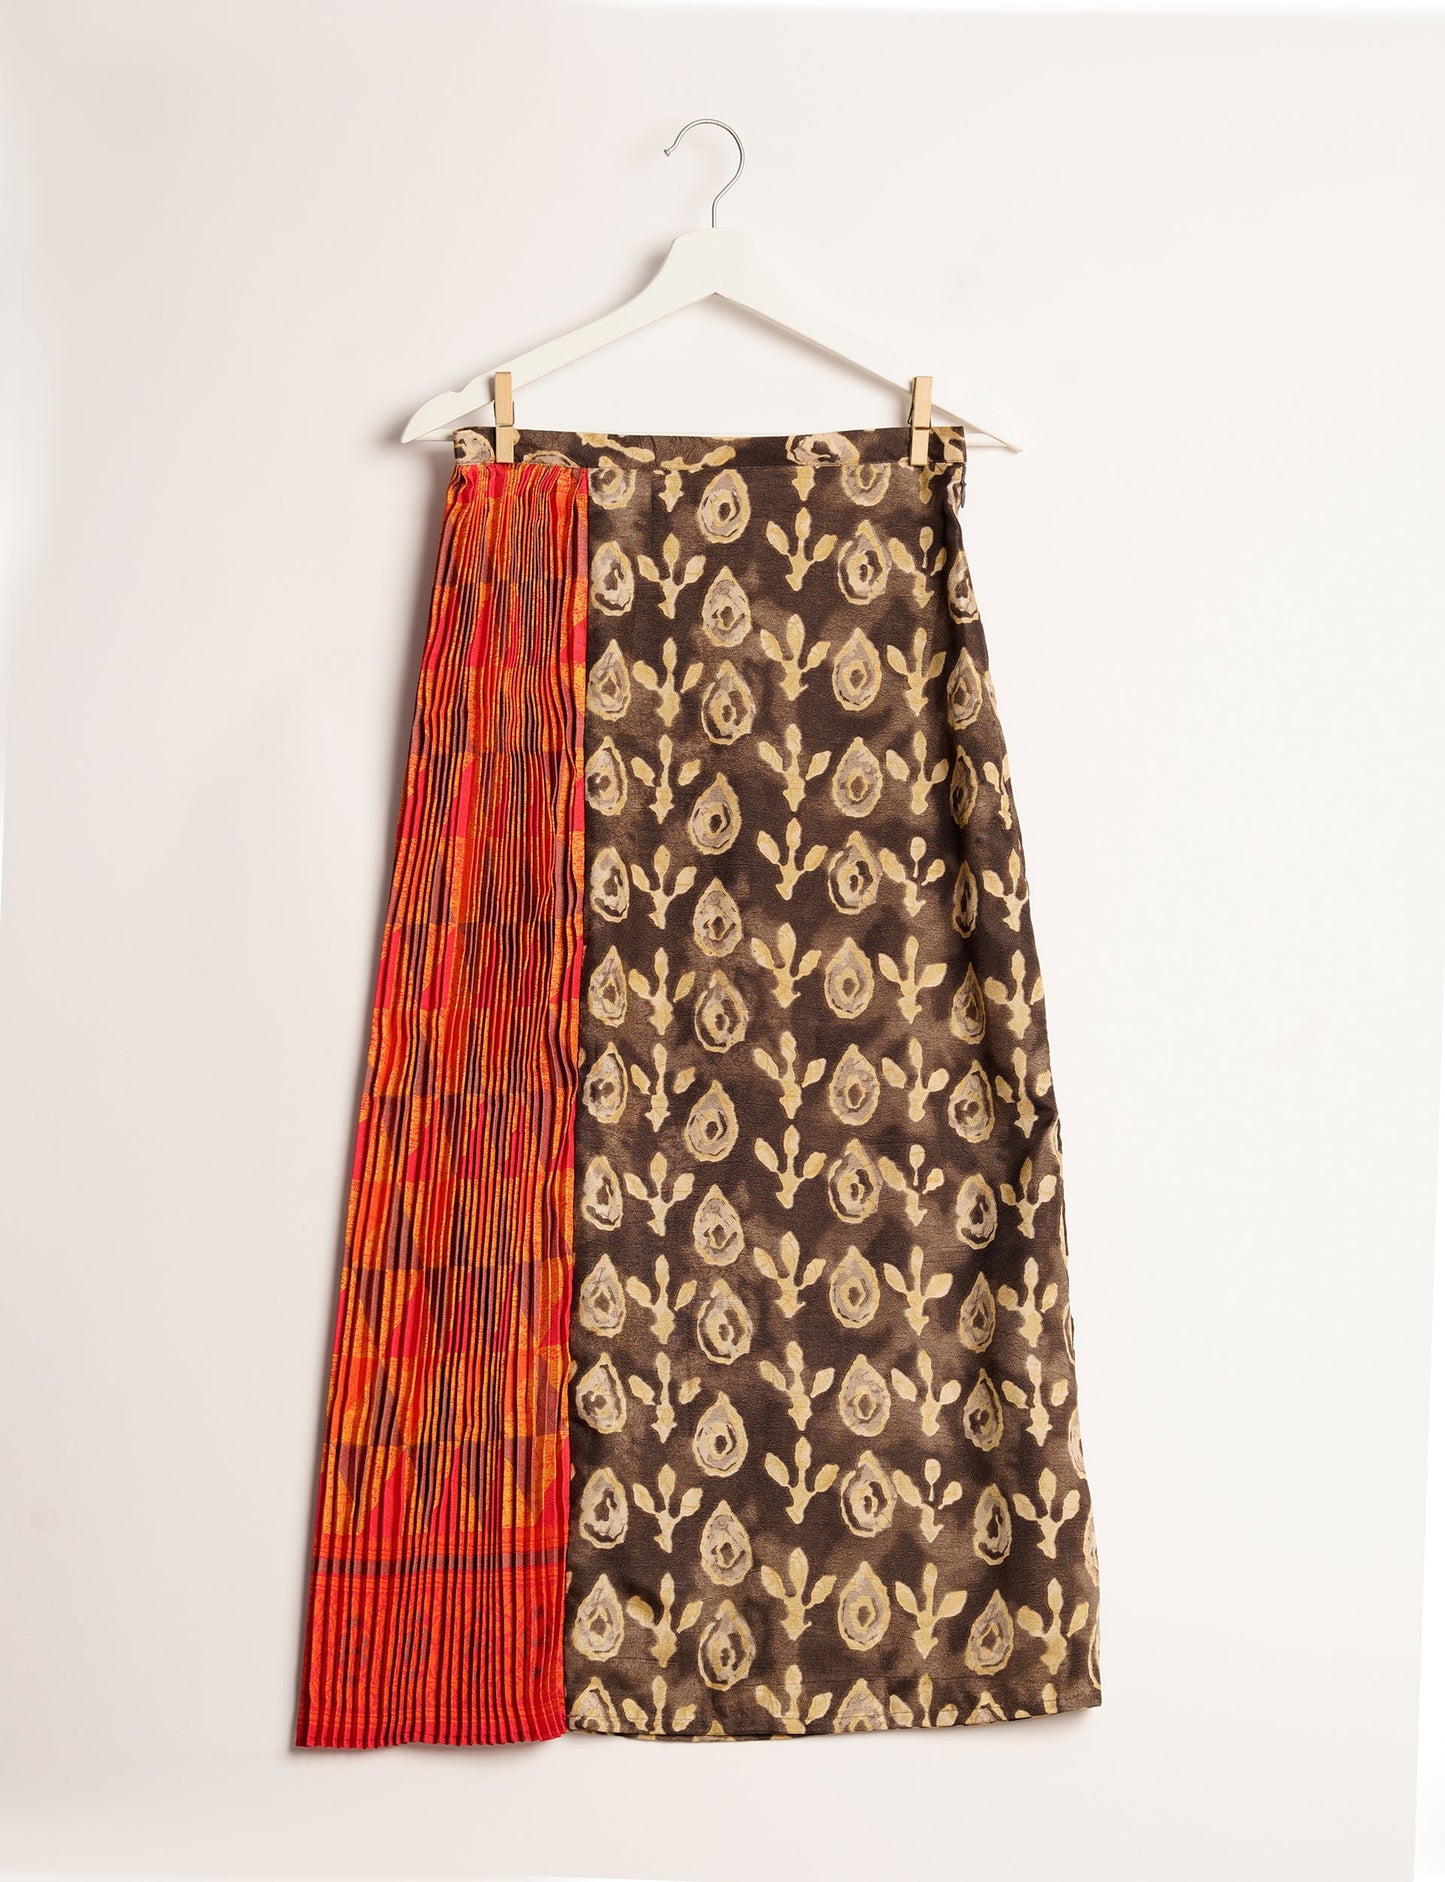 Elevate your wardrobe with the Semi Pleated A-Line Skirt, a sustainable fashion statement. Unique prints, a mix of fabrics, and intricate knife pleats create an individualized, upscale day-to-night look. Crafted with ethical and green fashion values, this skirt represents the essence of eco-friendly style.